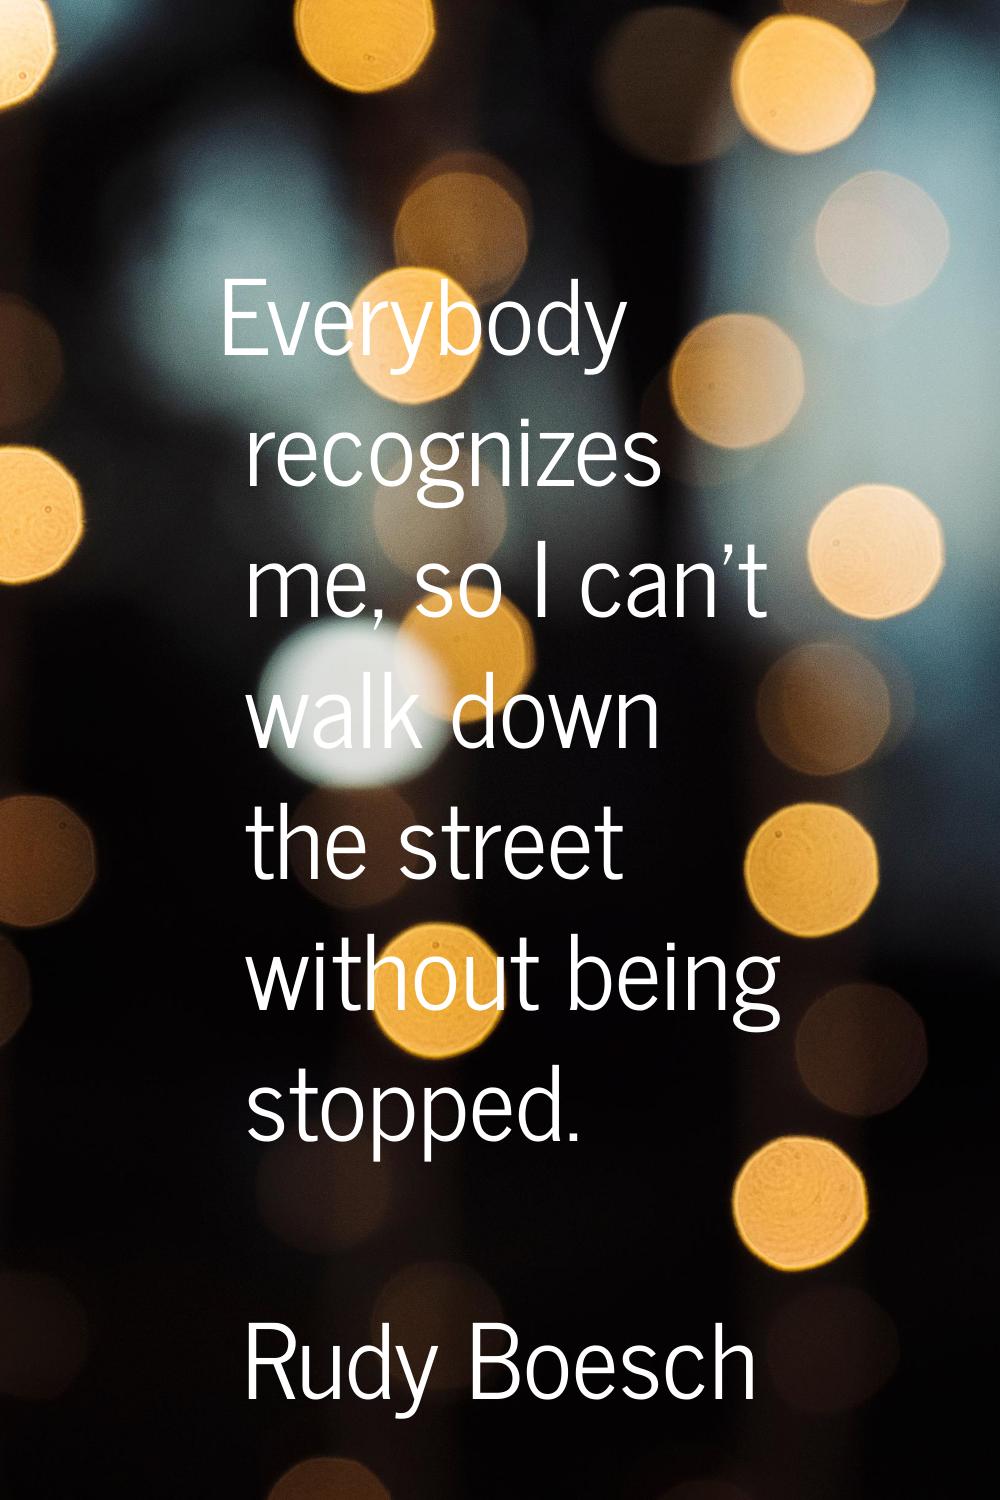 Everybody recognizes me, so I can't walk down the street without being stopped.